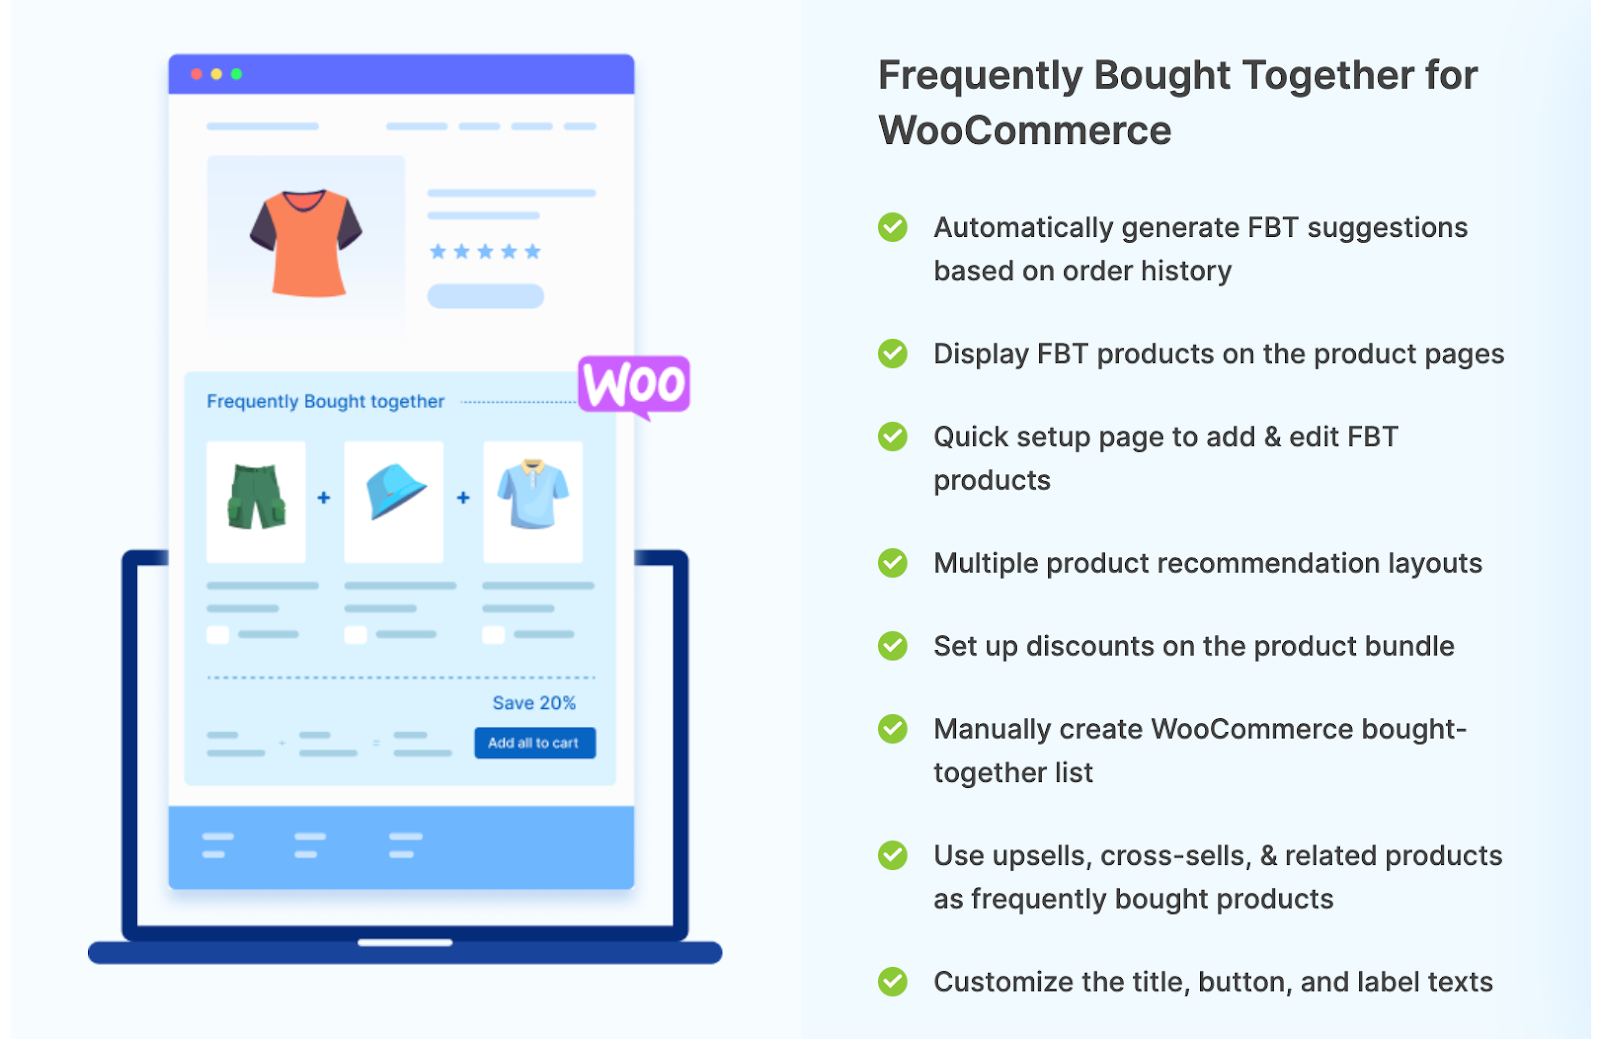 7. Frequently Bought Together for WooCommerce